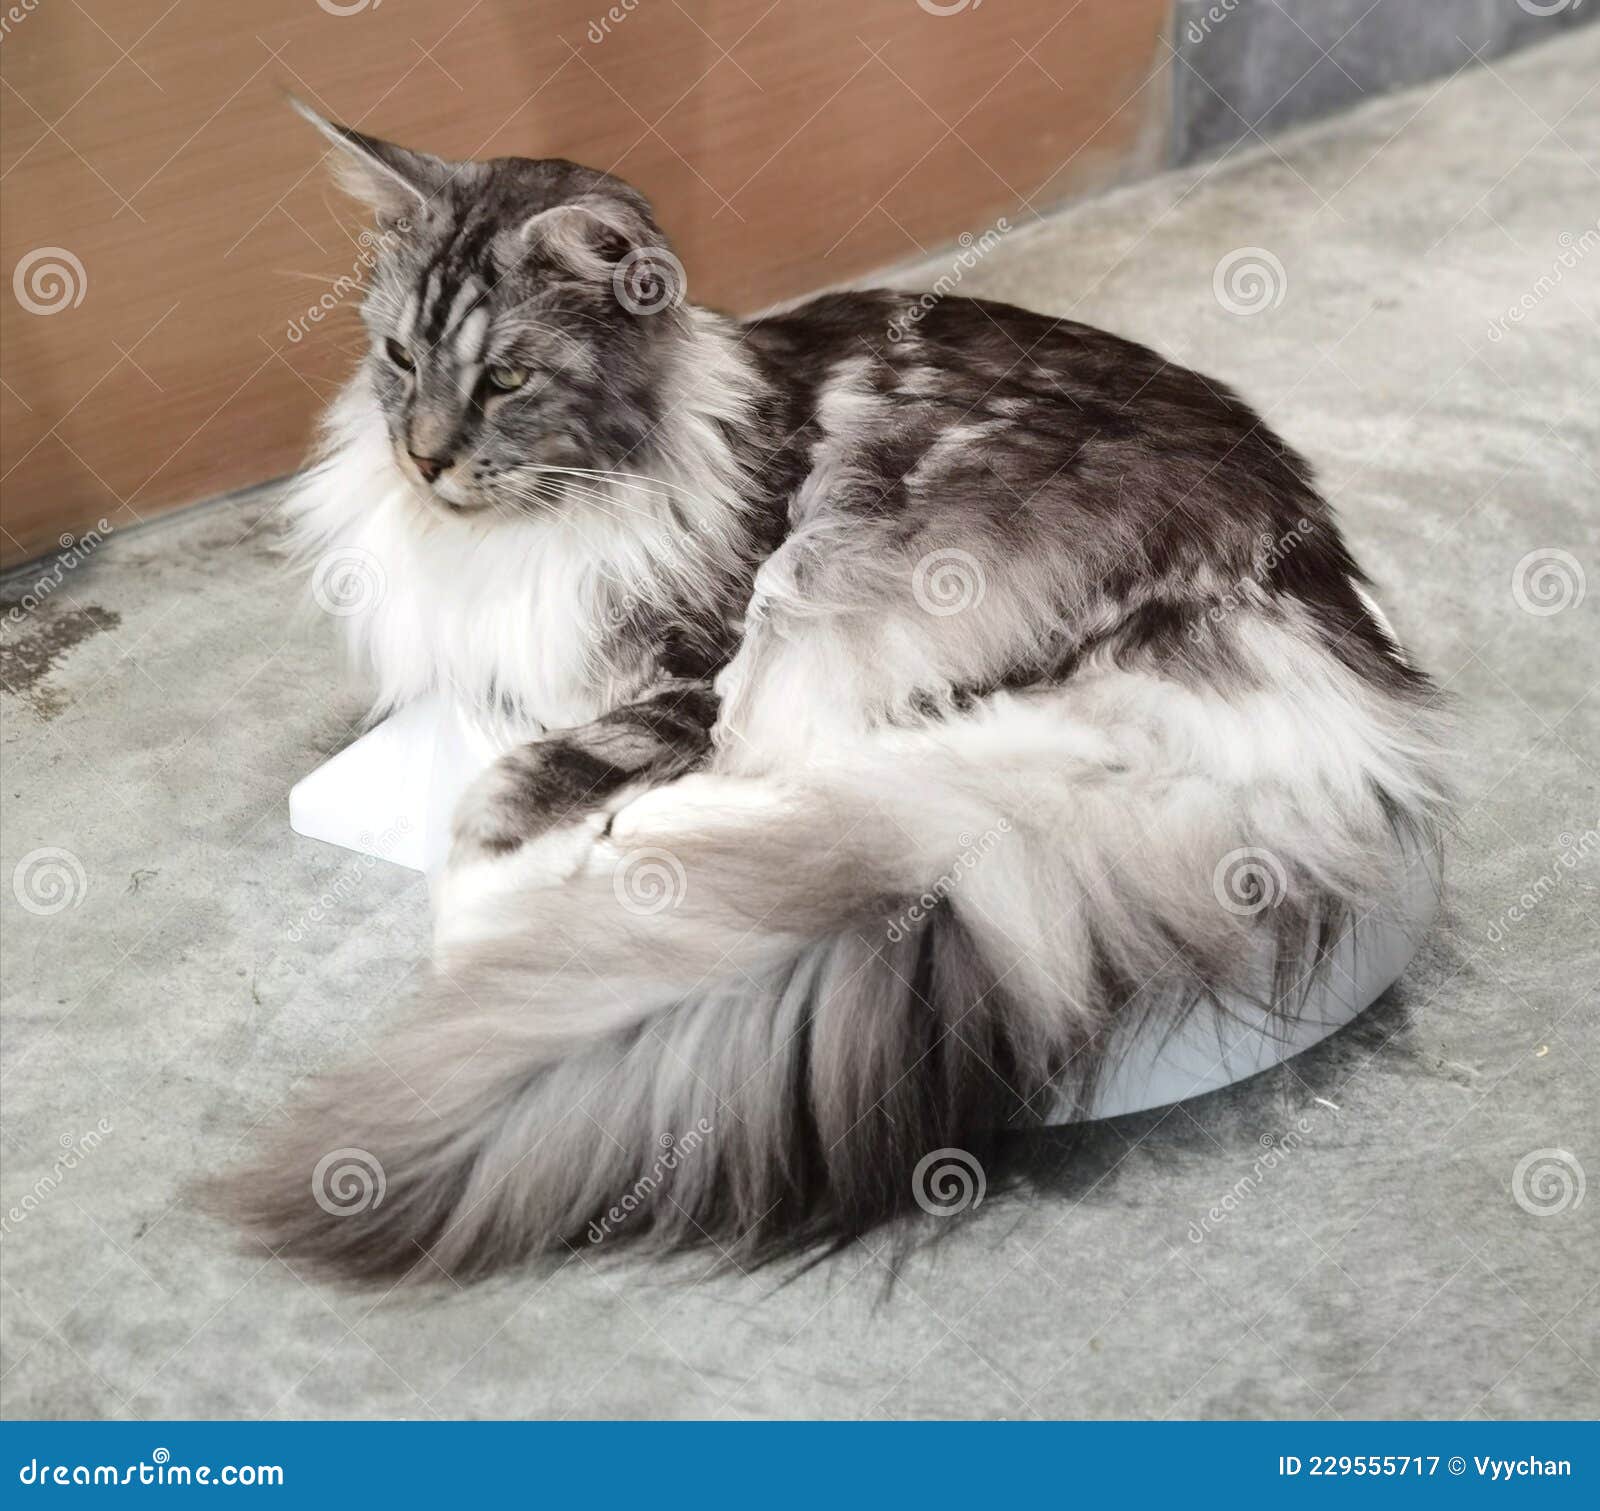 US Maine Coon Cats Large Domestic Cat Breed Exotic Longhair Dog-like Kitty  Kitties Tiger Kitten Meow Pet Big Pets Grooming Showcat Stock Image - Image  of curls, catwalk: 229555717